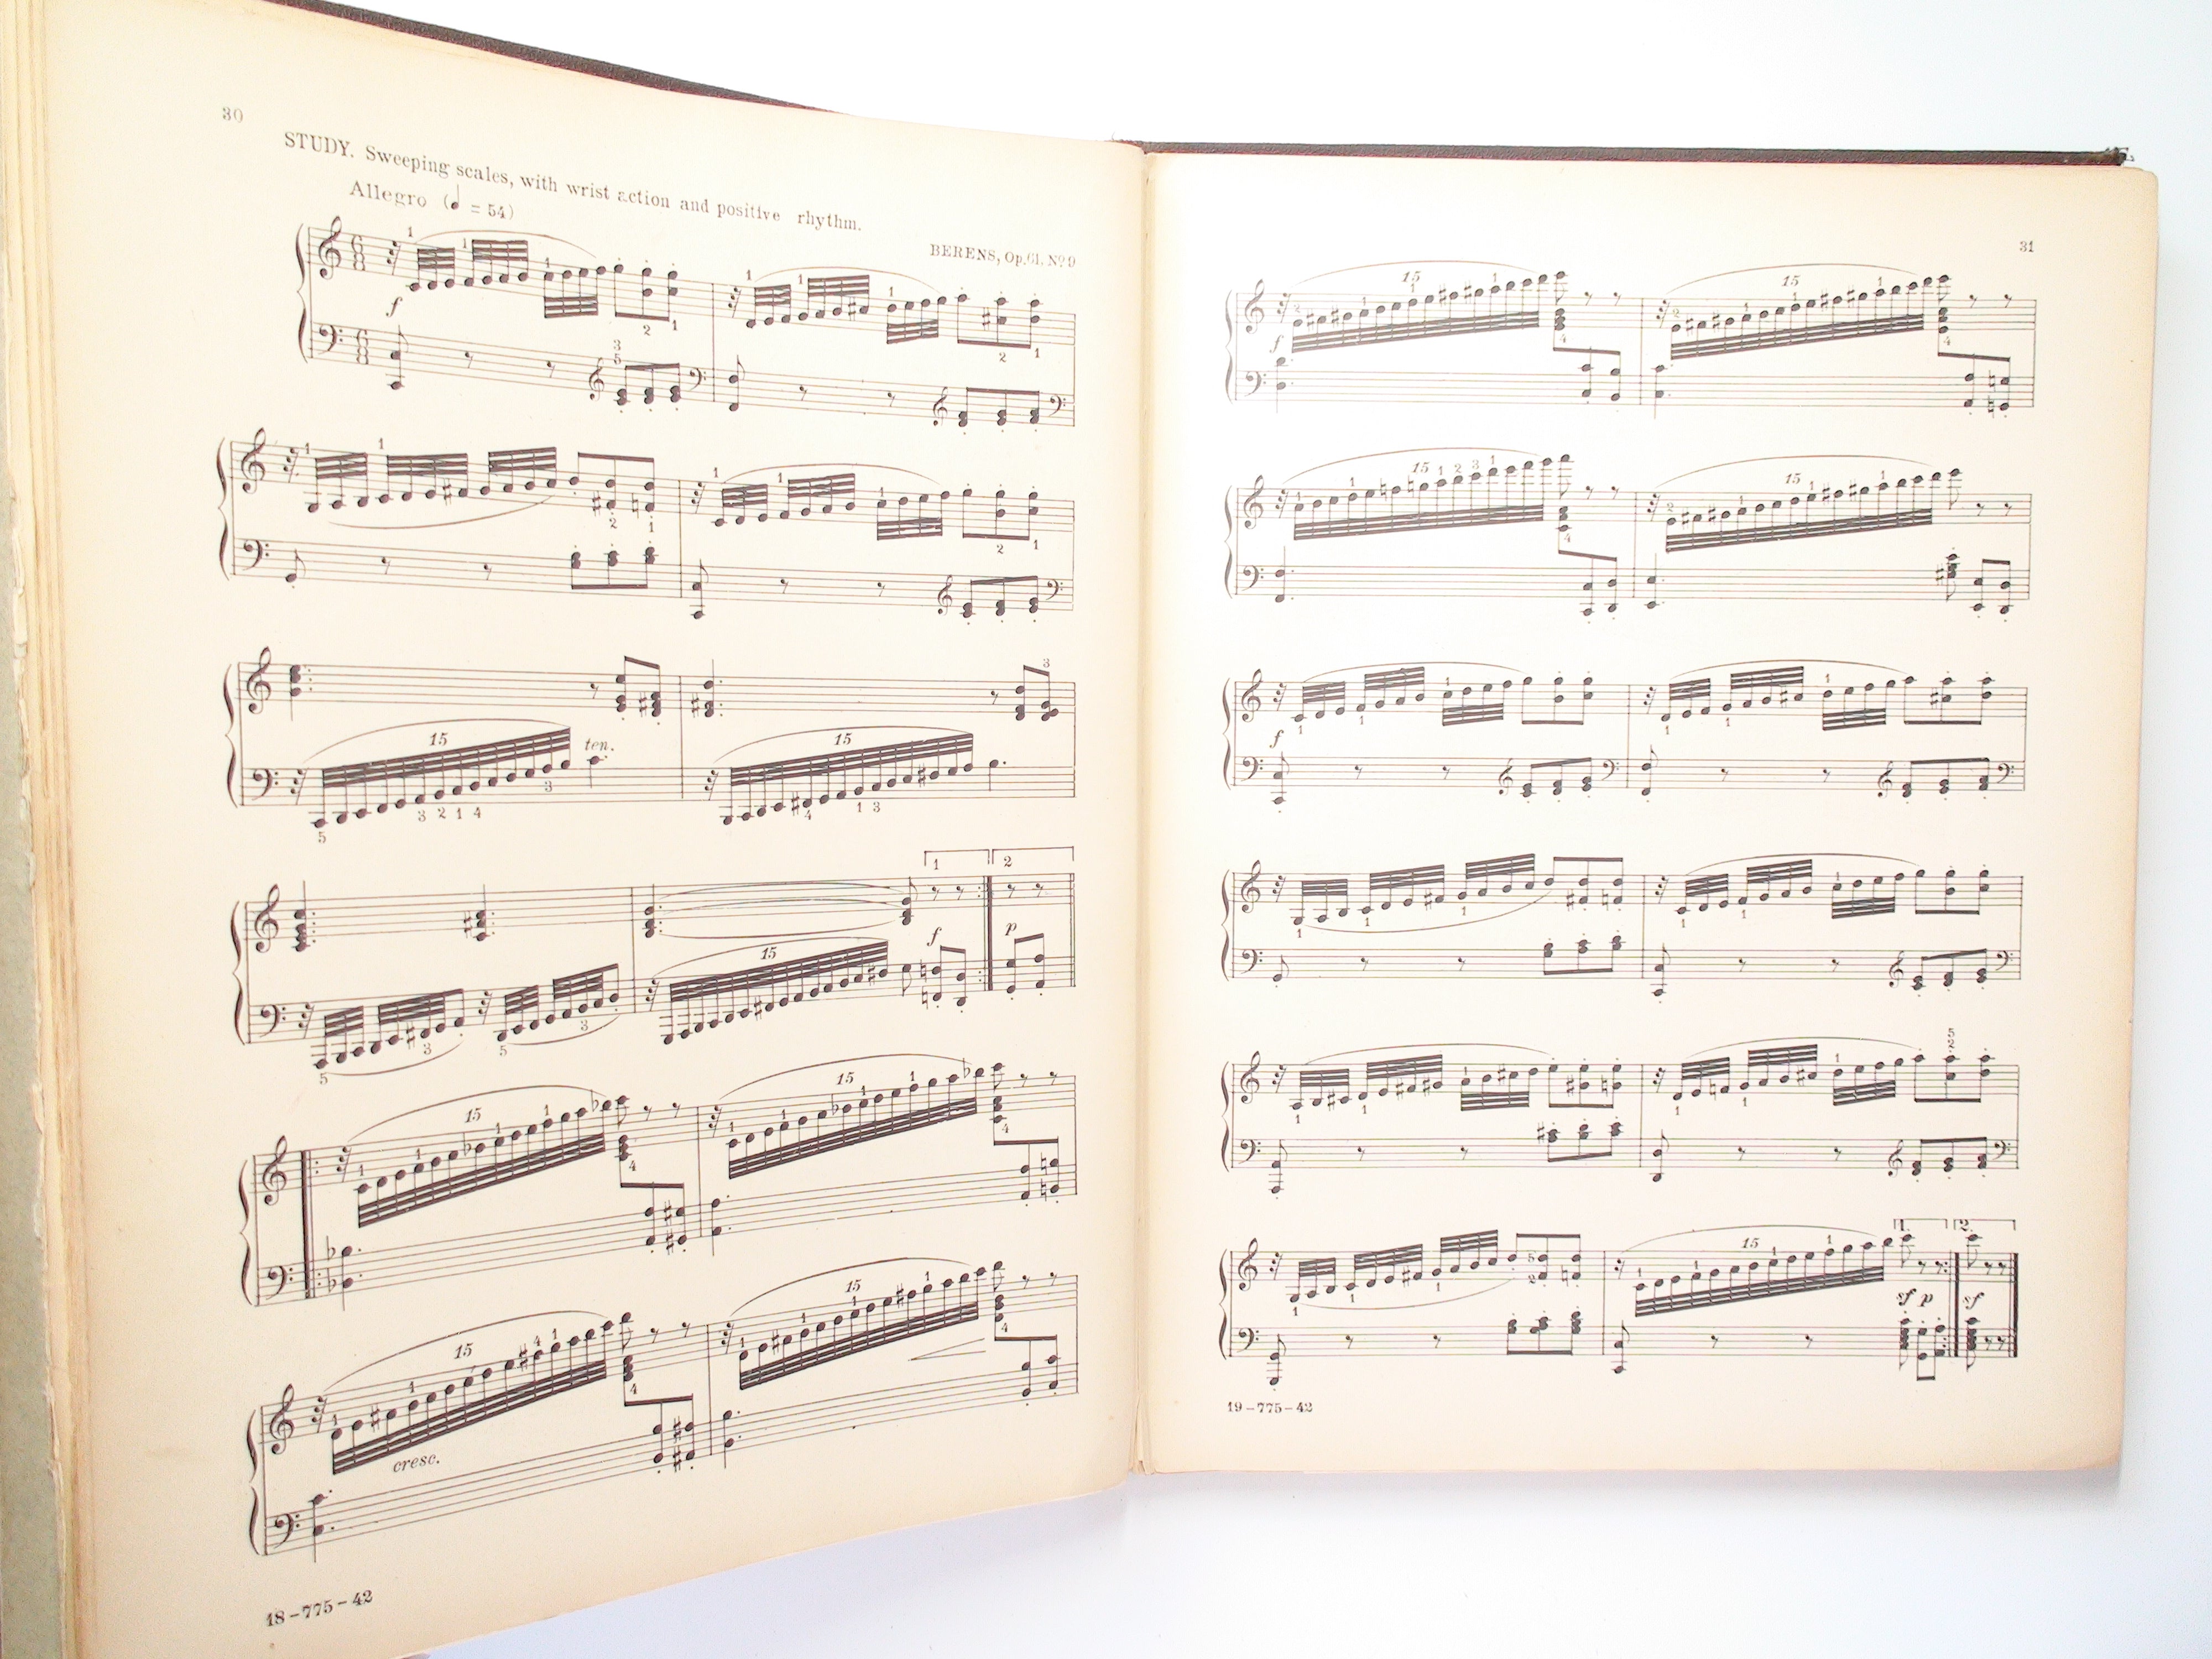 The International Library of Music, Charles Dennee, One Vol Only, 1925